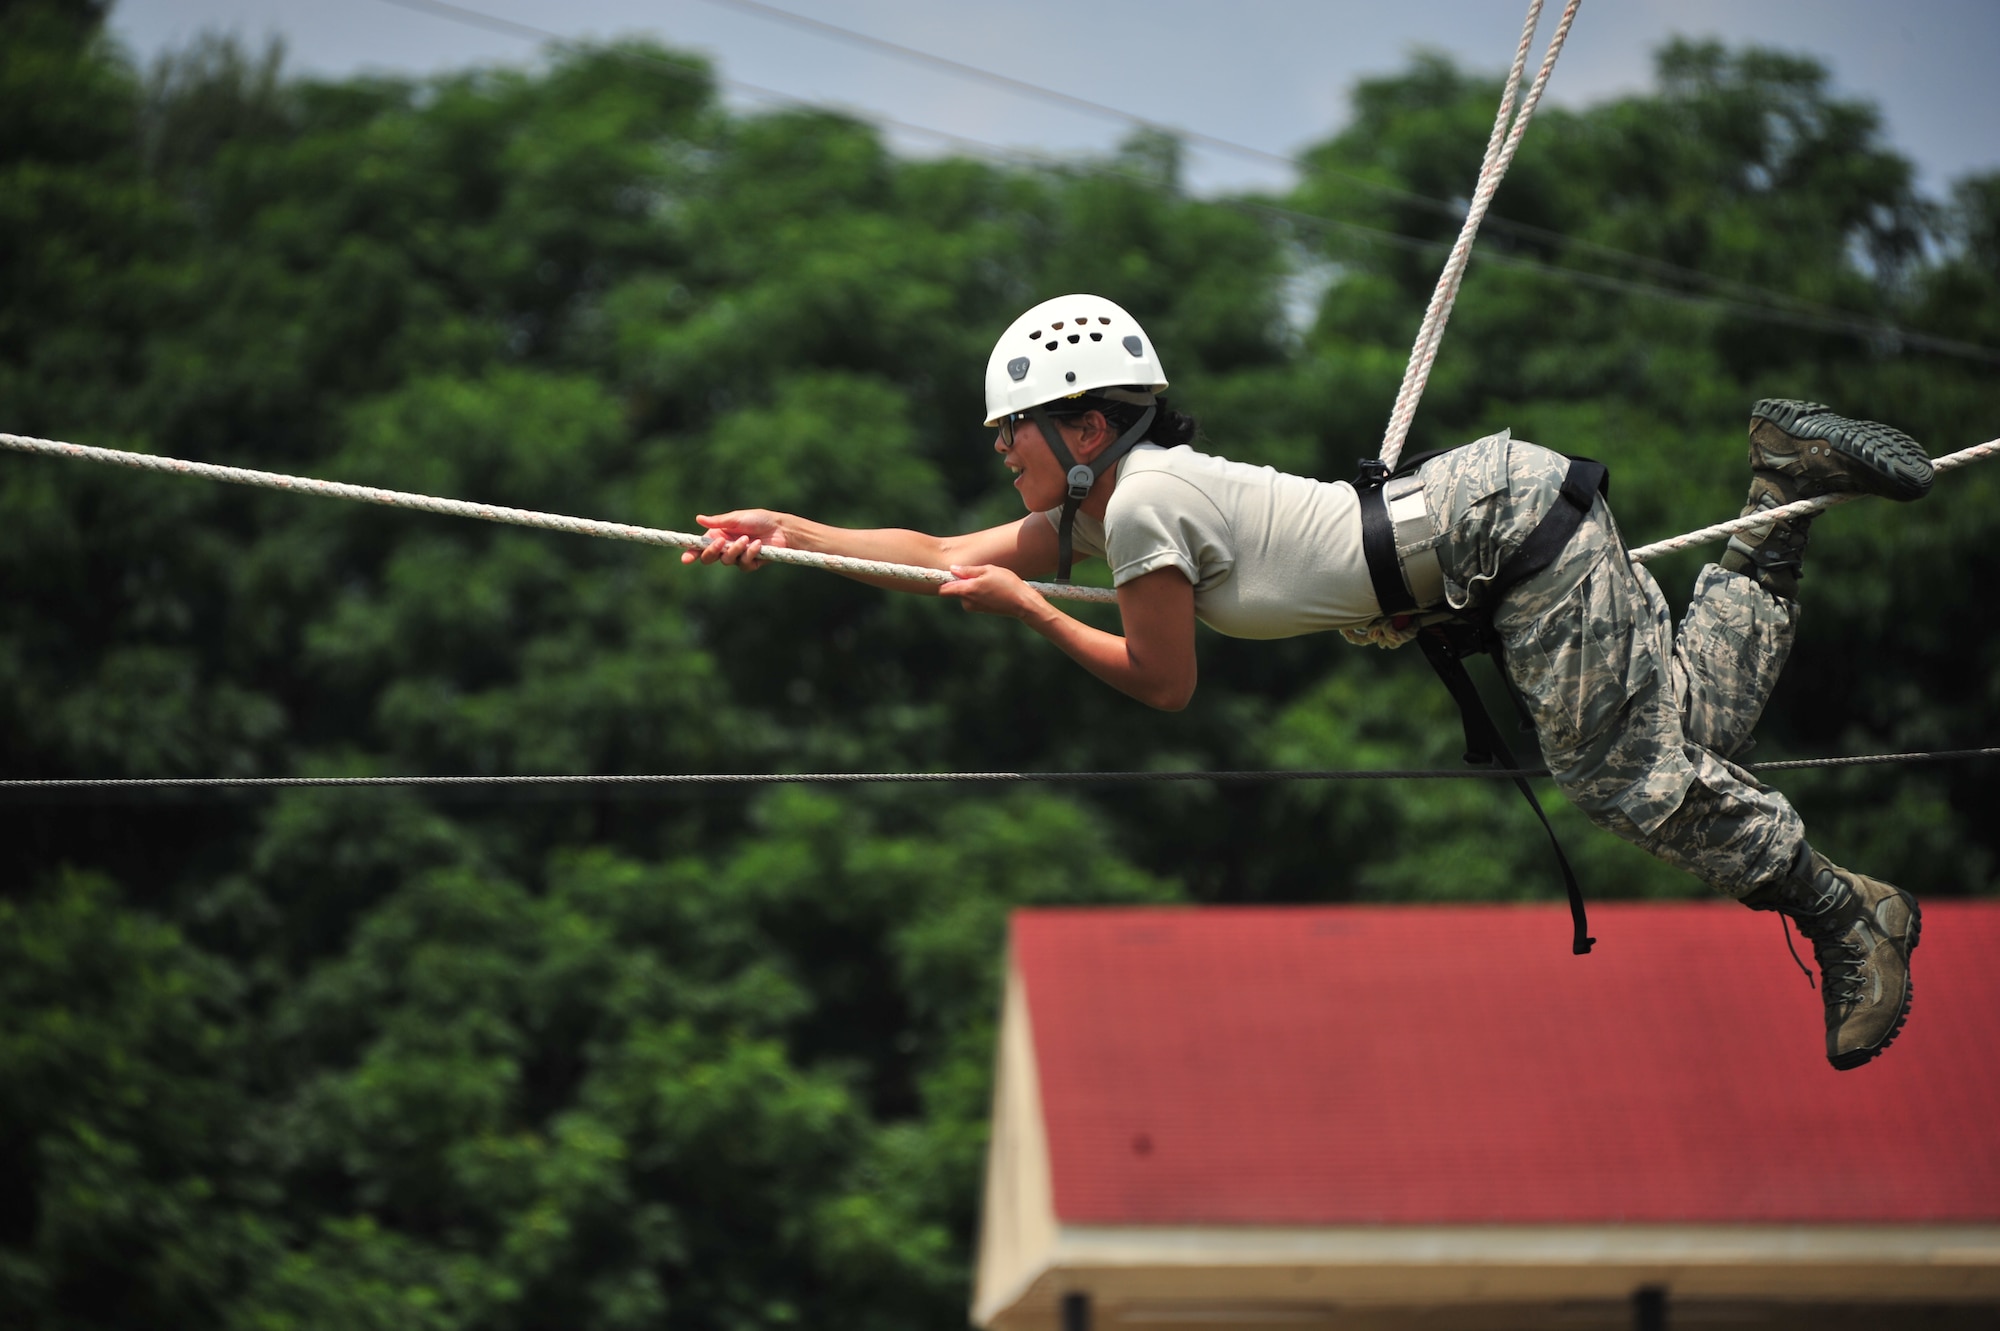 A Commissioned Officer Training School student pulls herself across a rope July 24, 2014, during an exercise conditioning course at Maxwell Air Force Base, Ala. Commissioned medical, legal and chaplain officers must go through COT to receive military leadership training. The ropes course is a confidence and team building part of the training. (U.S. Air Force photo/Staff Sgt. Natasha Stannard)